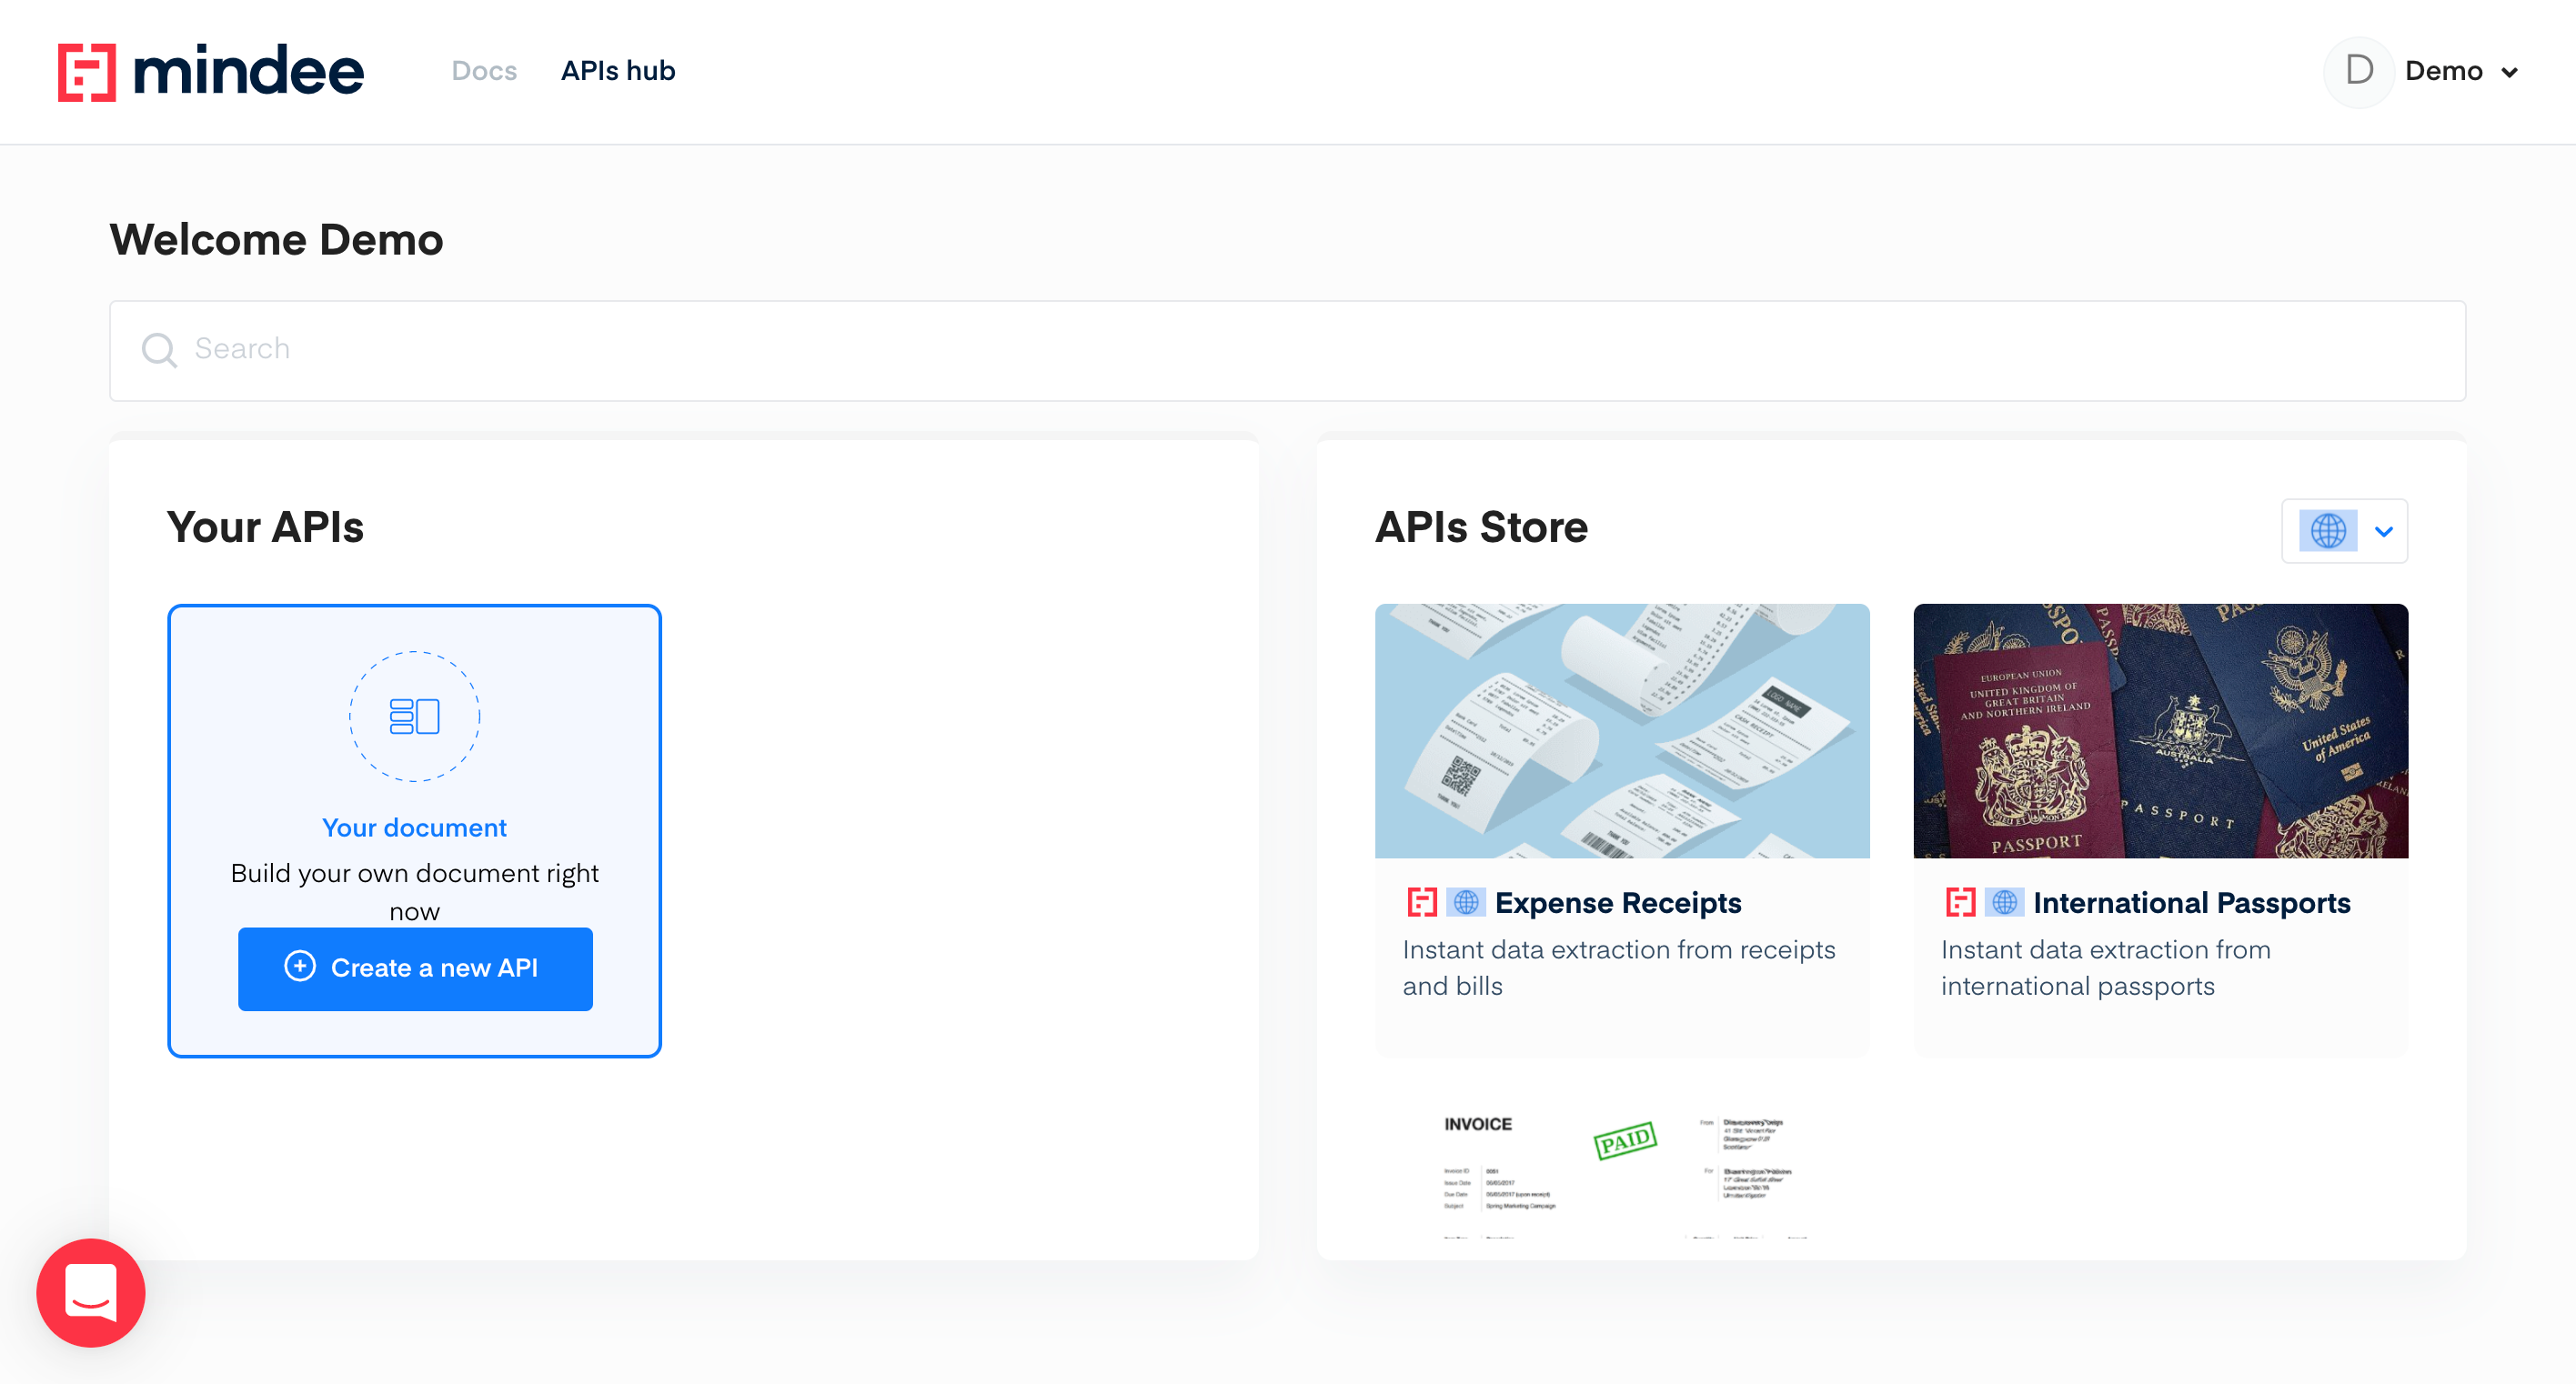 Mindee API Store on the left and Your APIs on the right